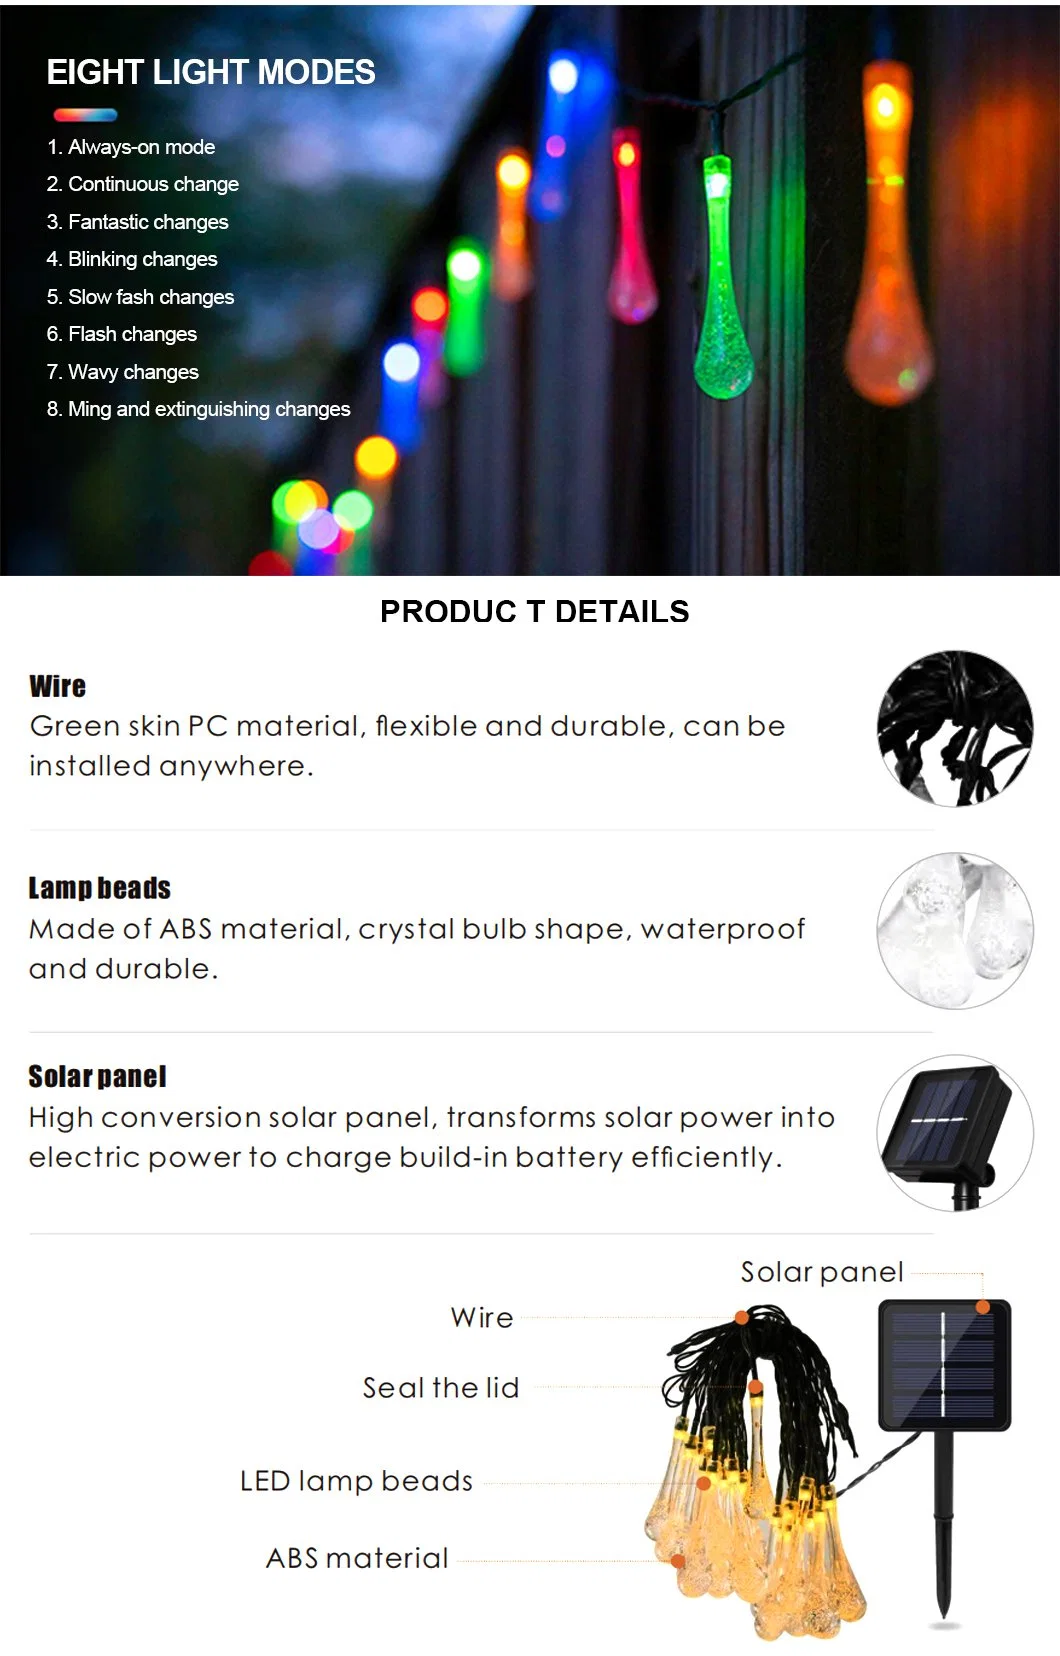 Christmas Festival Decorative Outdoor LED Solar Powered Water Drop String Lights LED Christmas Light for Garden Decoration